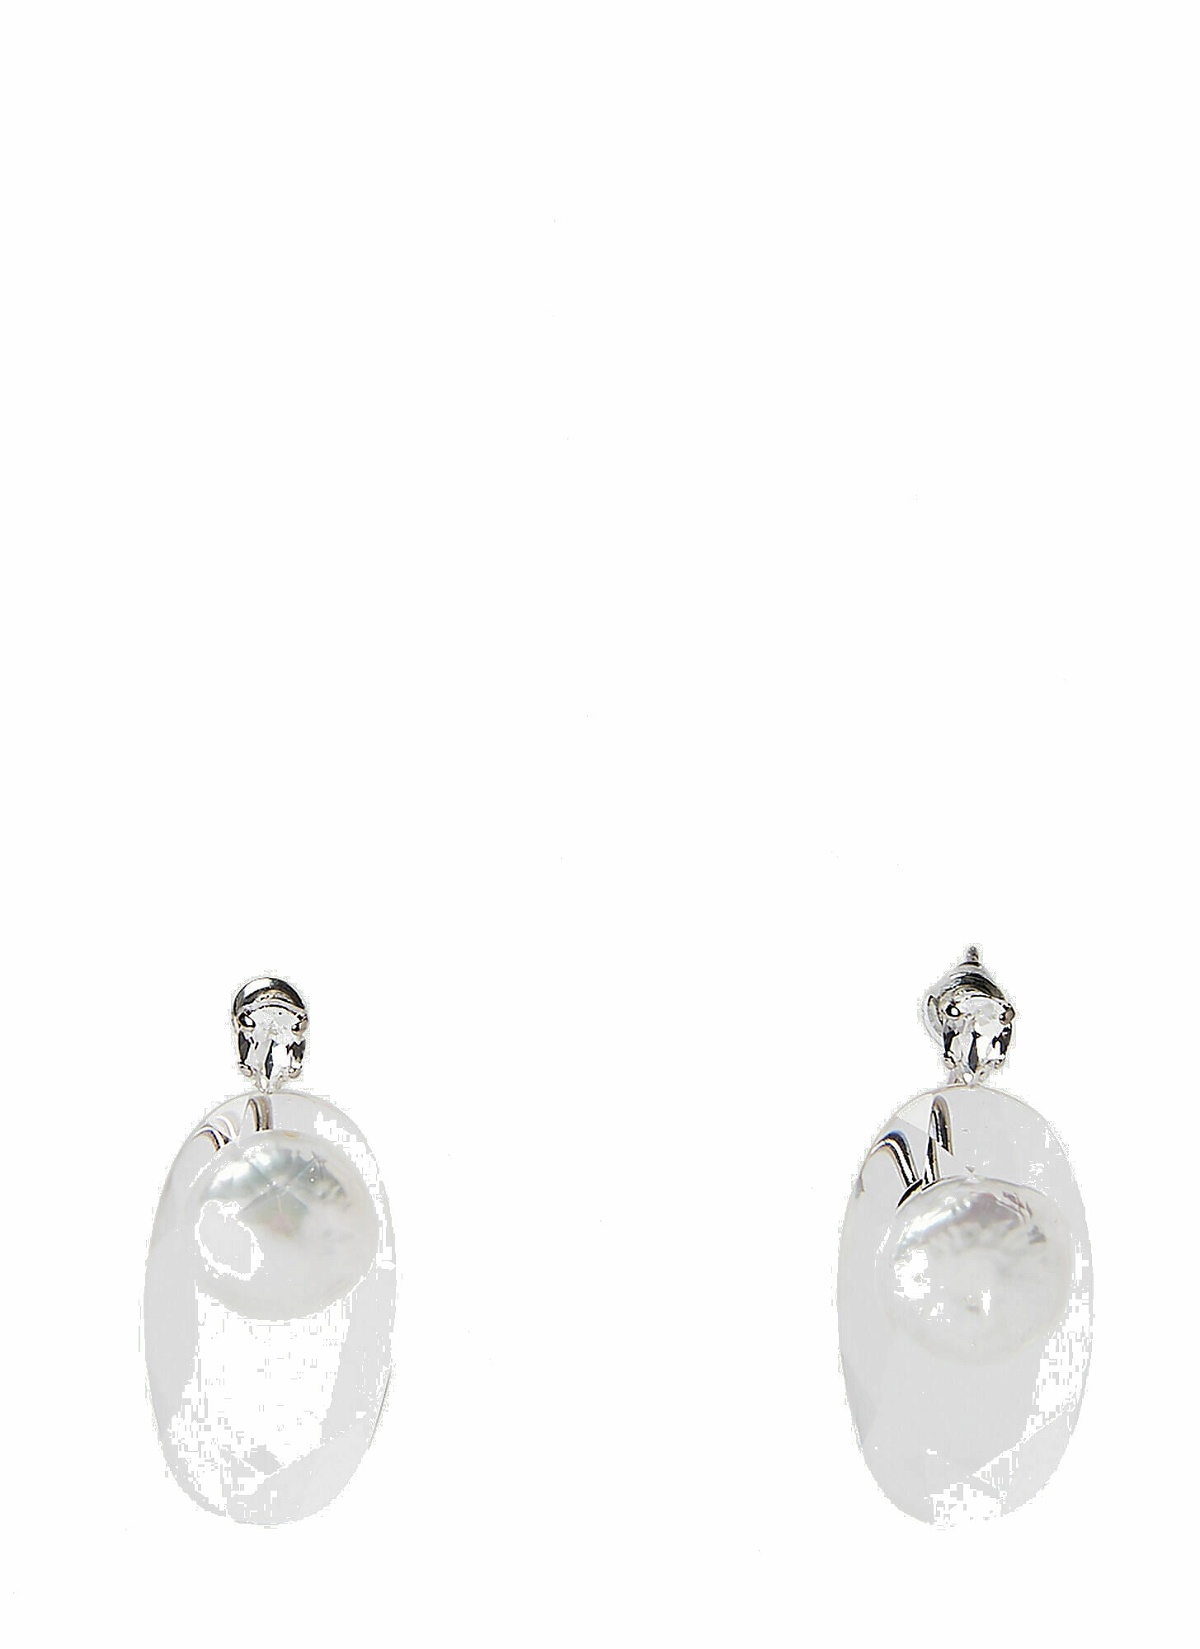 Photo: Trapped Pearl Earrings in Silver